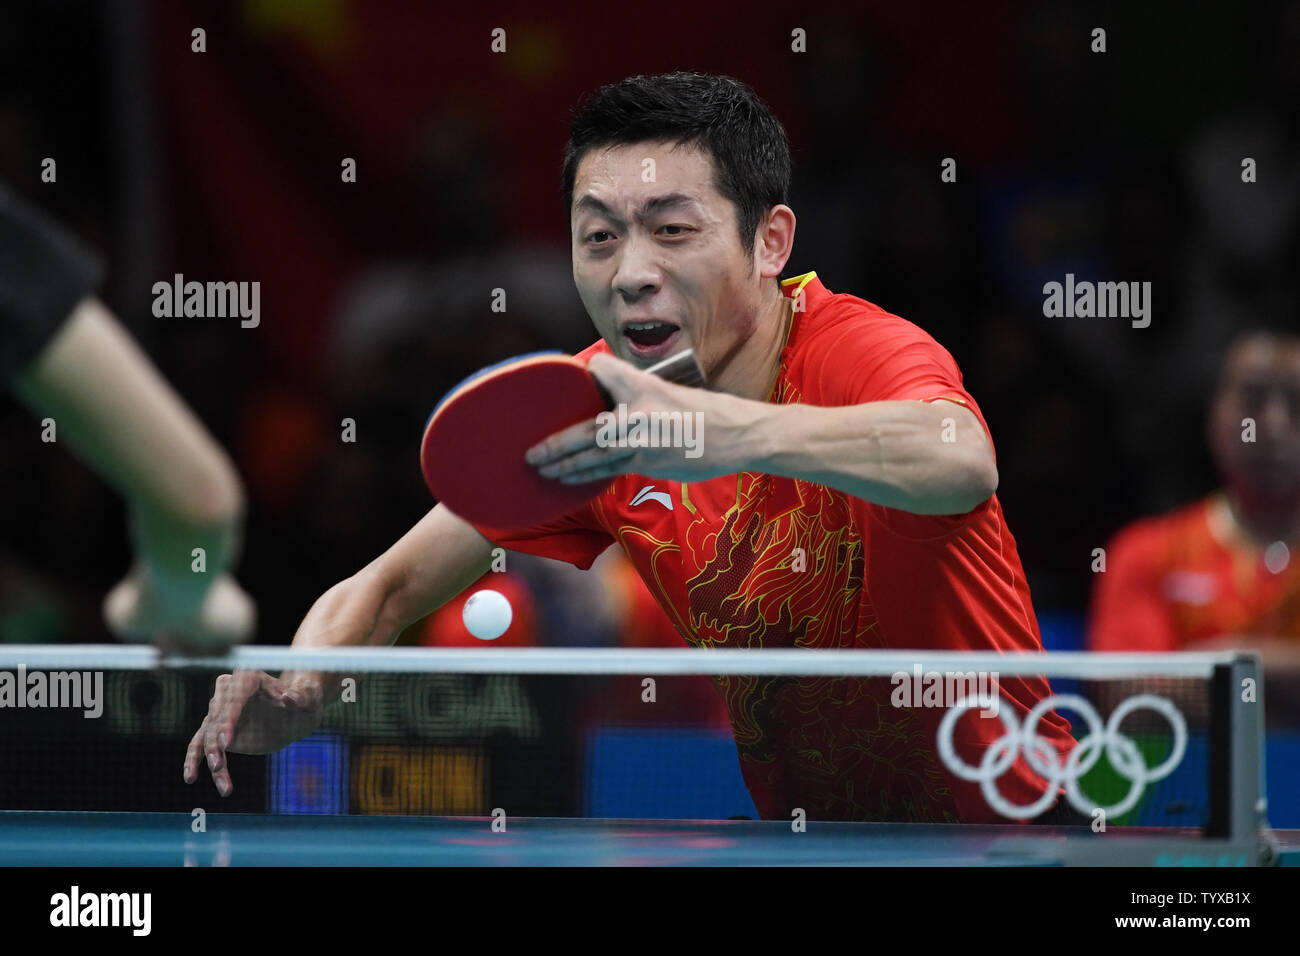 Xu Xin of China during his match against Jun Mizutani of Japan in the Men's Team Table Tennis gold medal match in Riocentro Pavilion 3 at the 2016 Rio Summer Olympics in Rio de Janeiro, Brazil, on August 17, 2016.   Photo by Richard Ellis/UPI Stock Photo